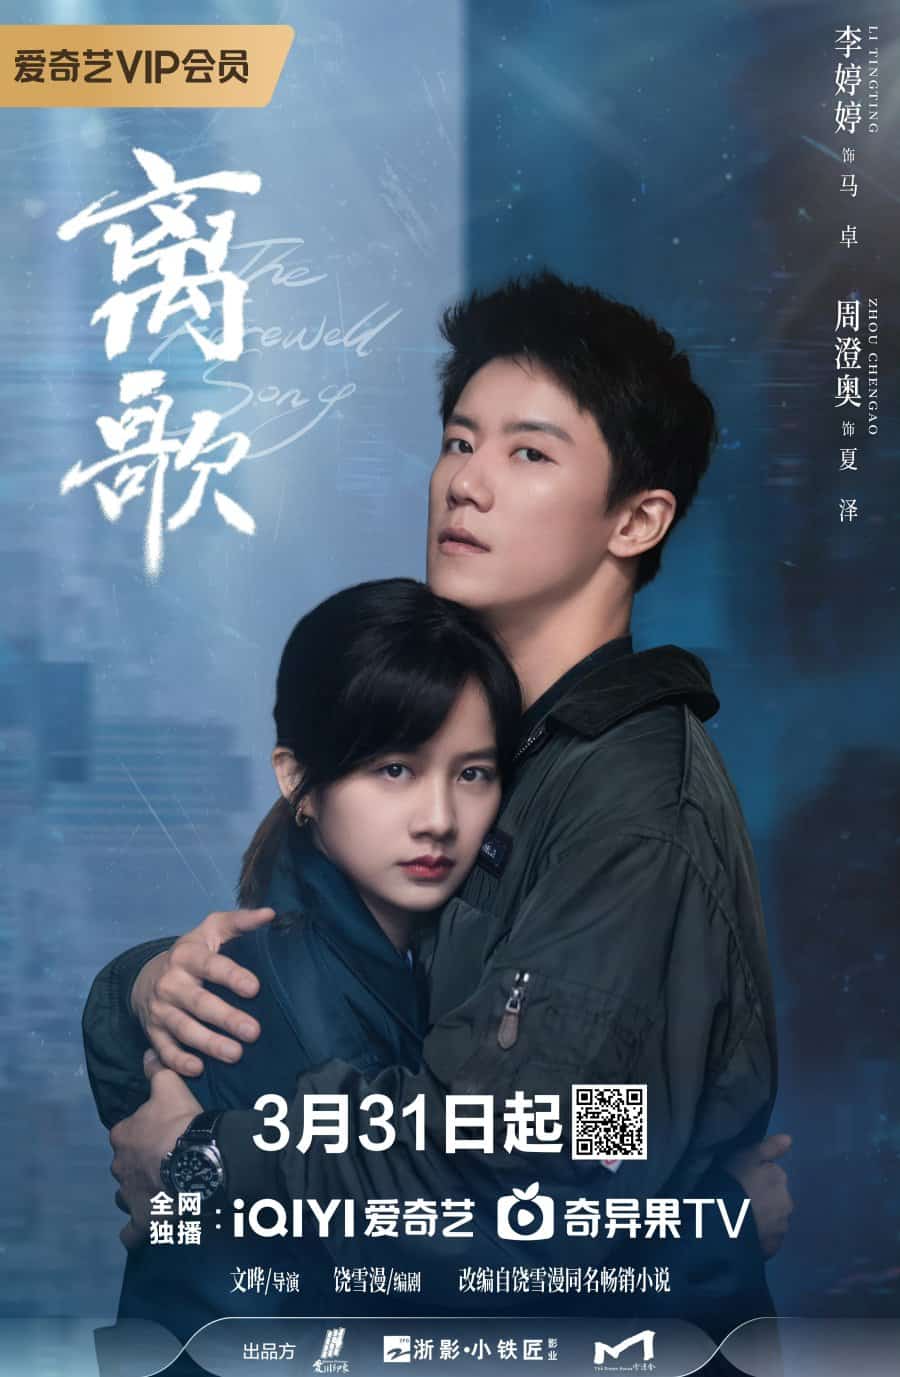 The Farewell Song - Sinopsis, Pemain, OST, Episode, Review